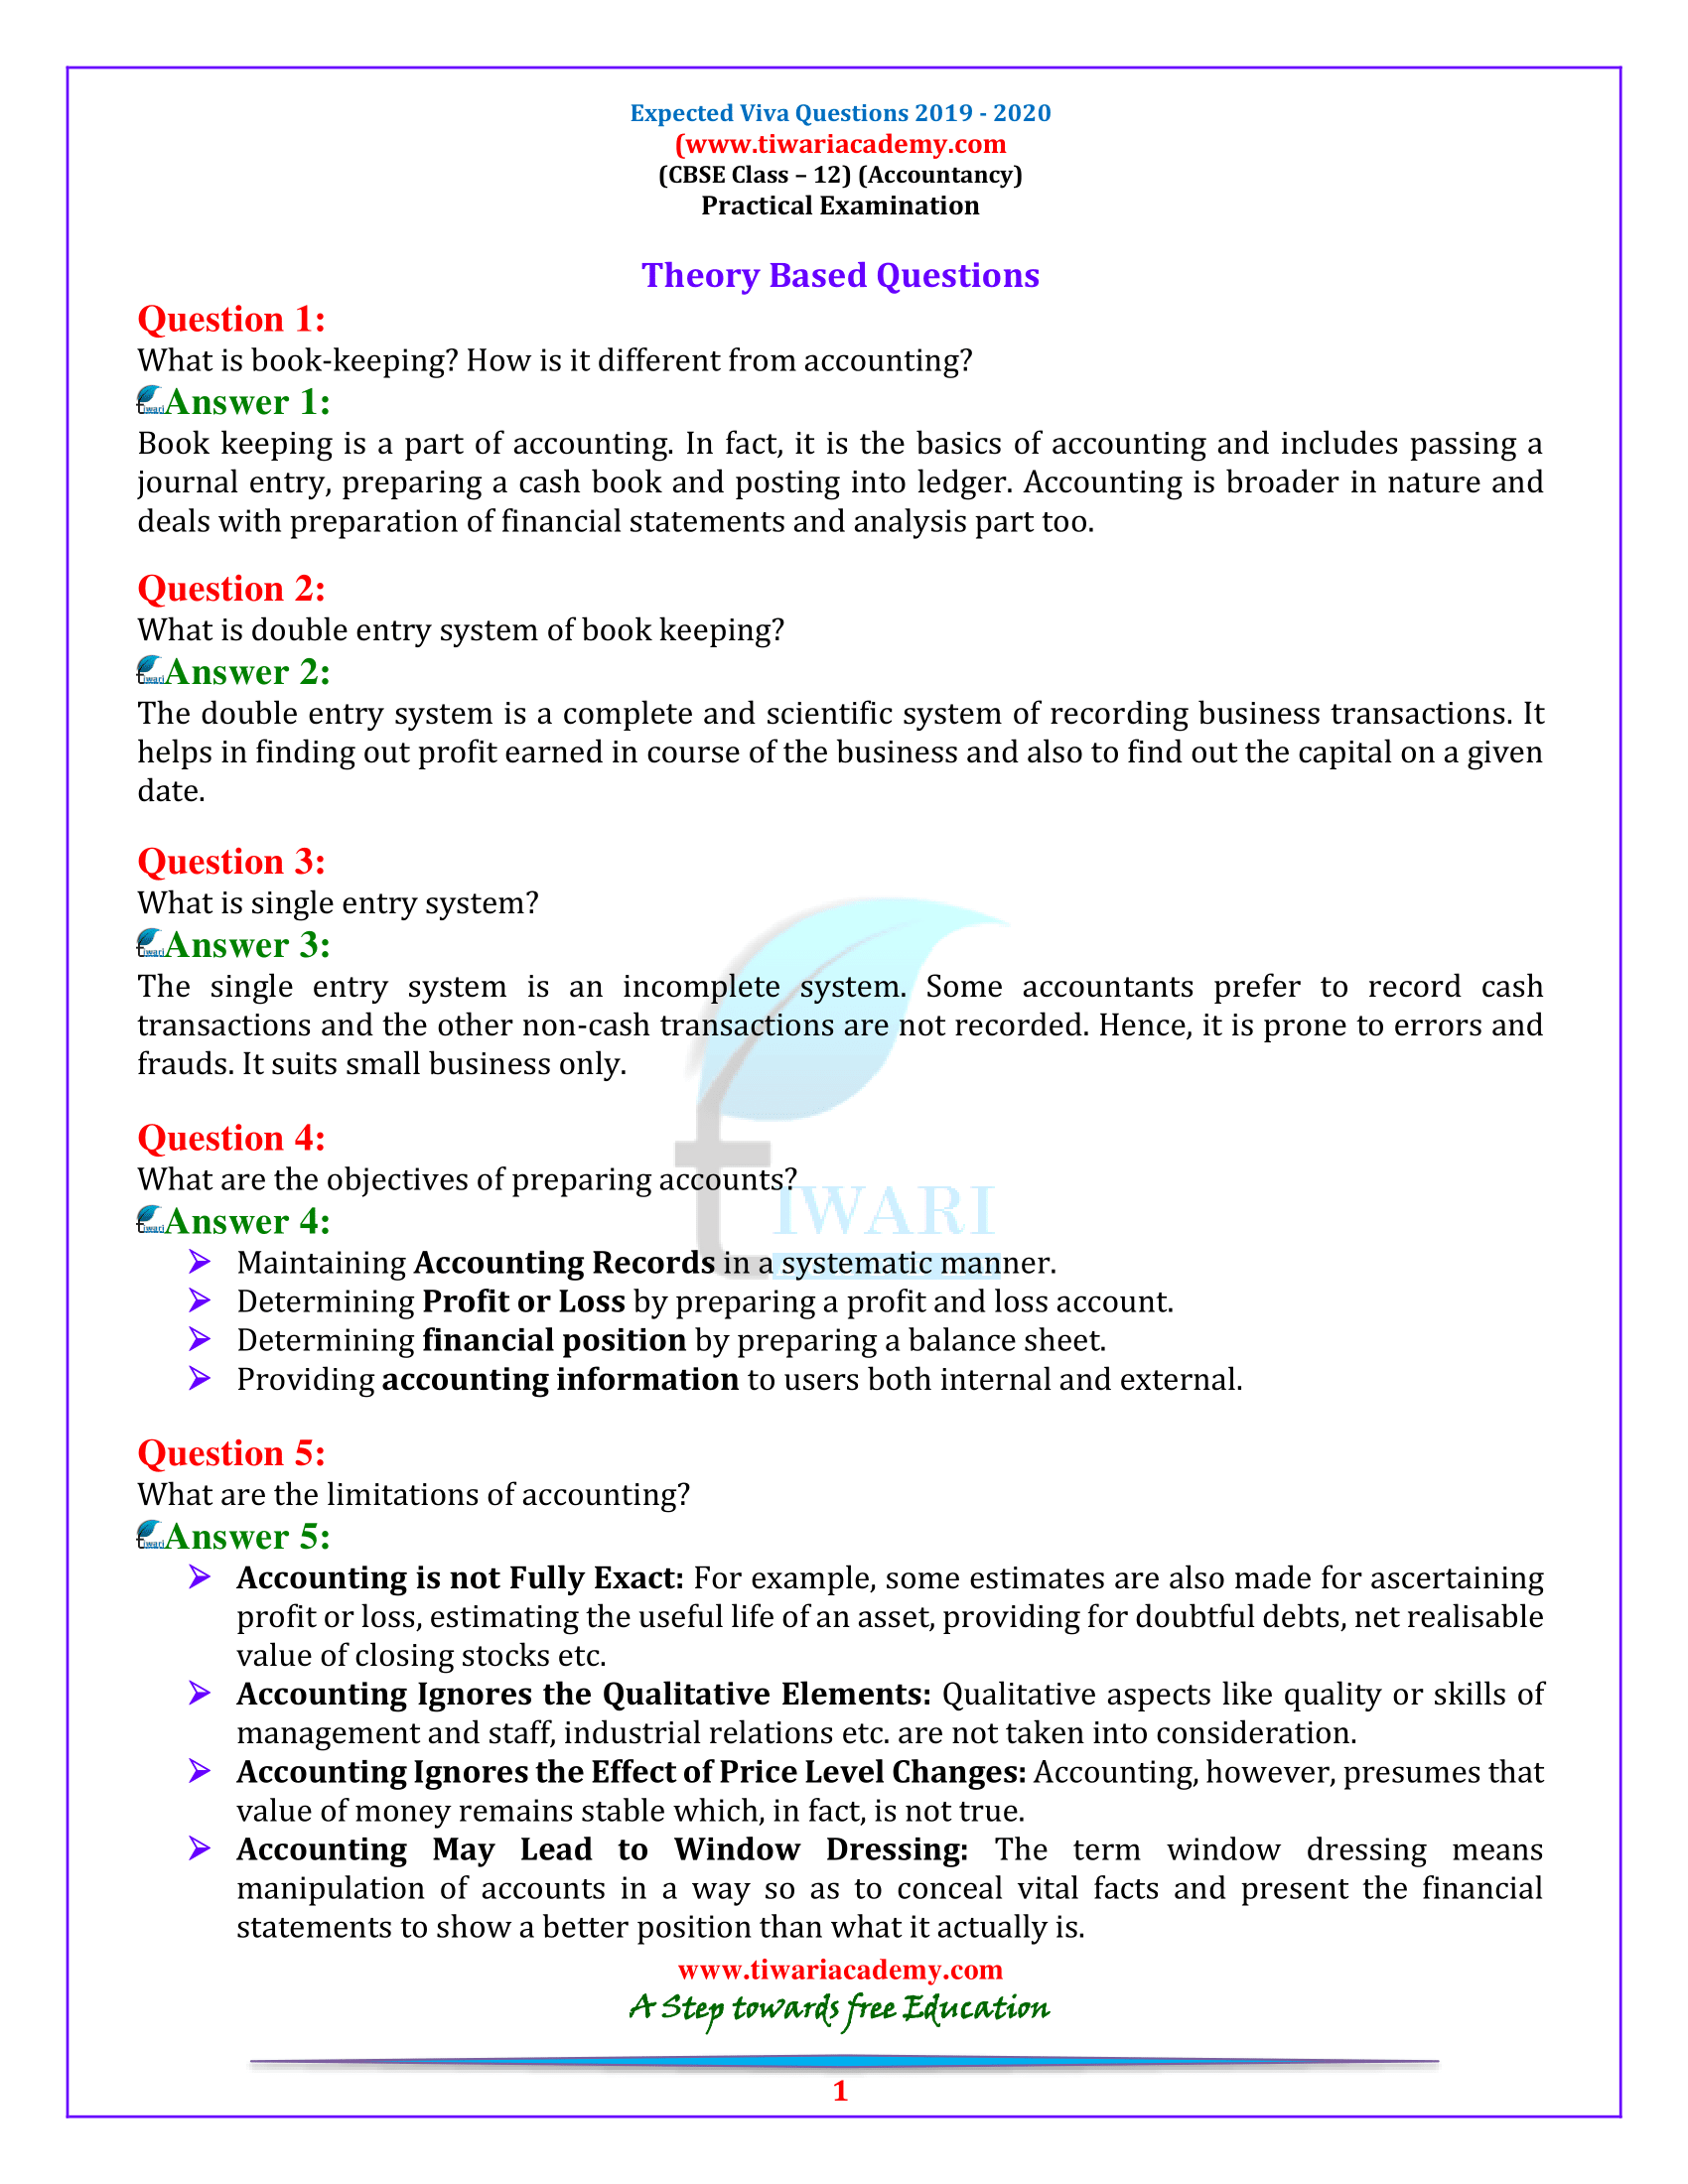 Theory based questions class 12 accounts